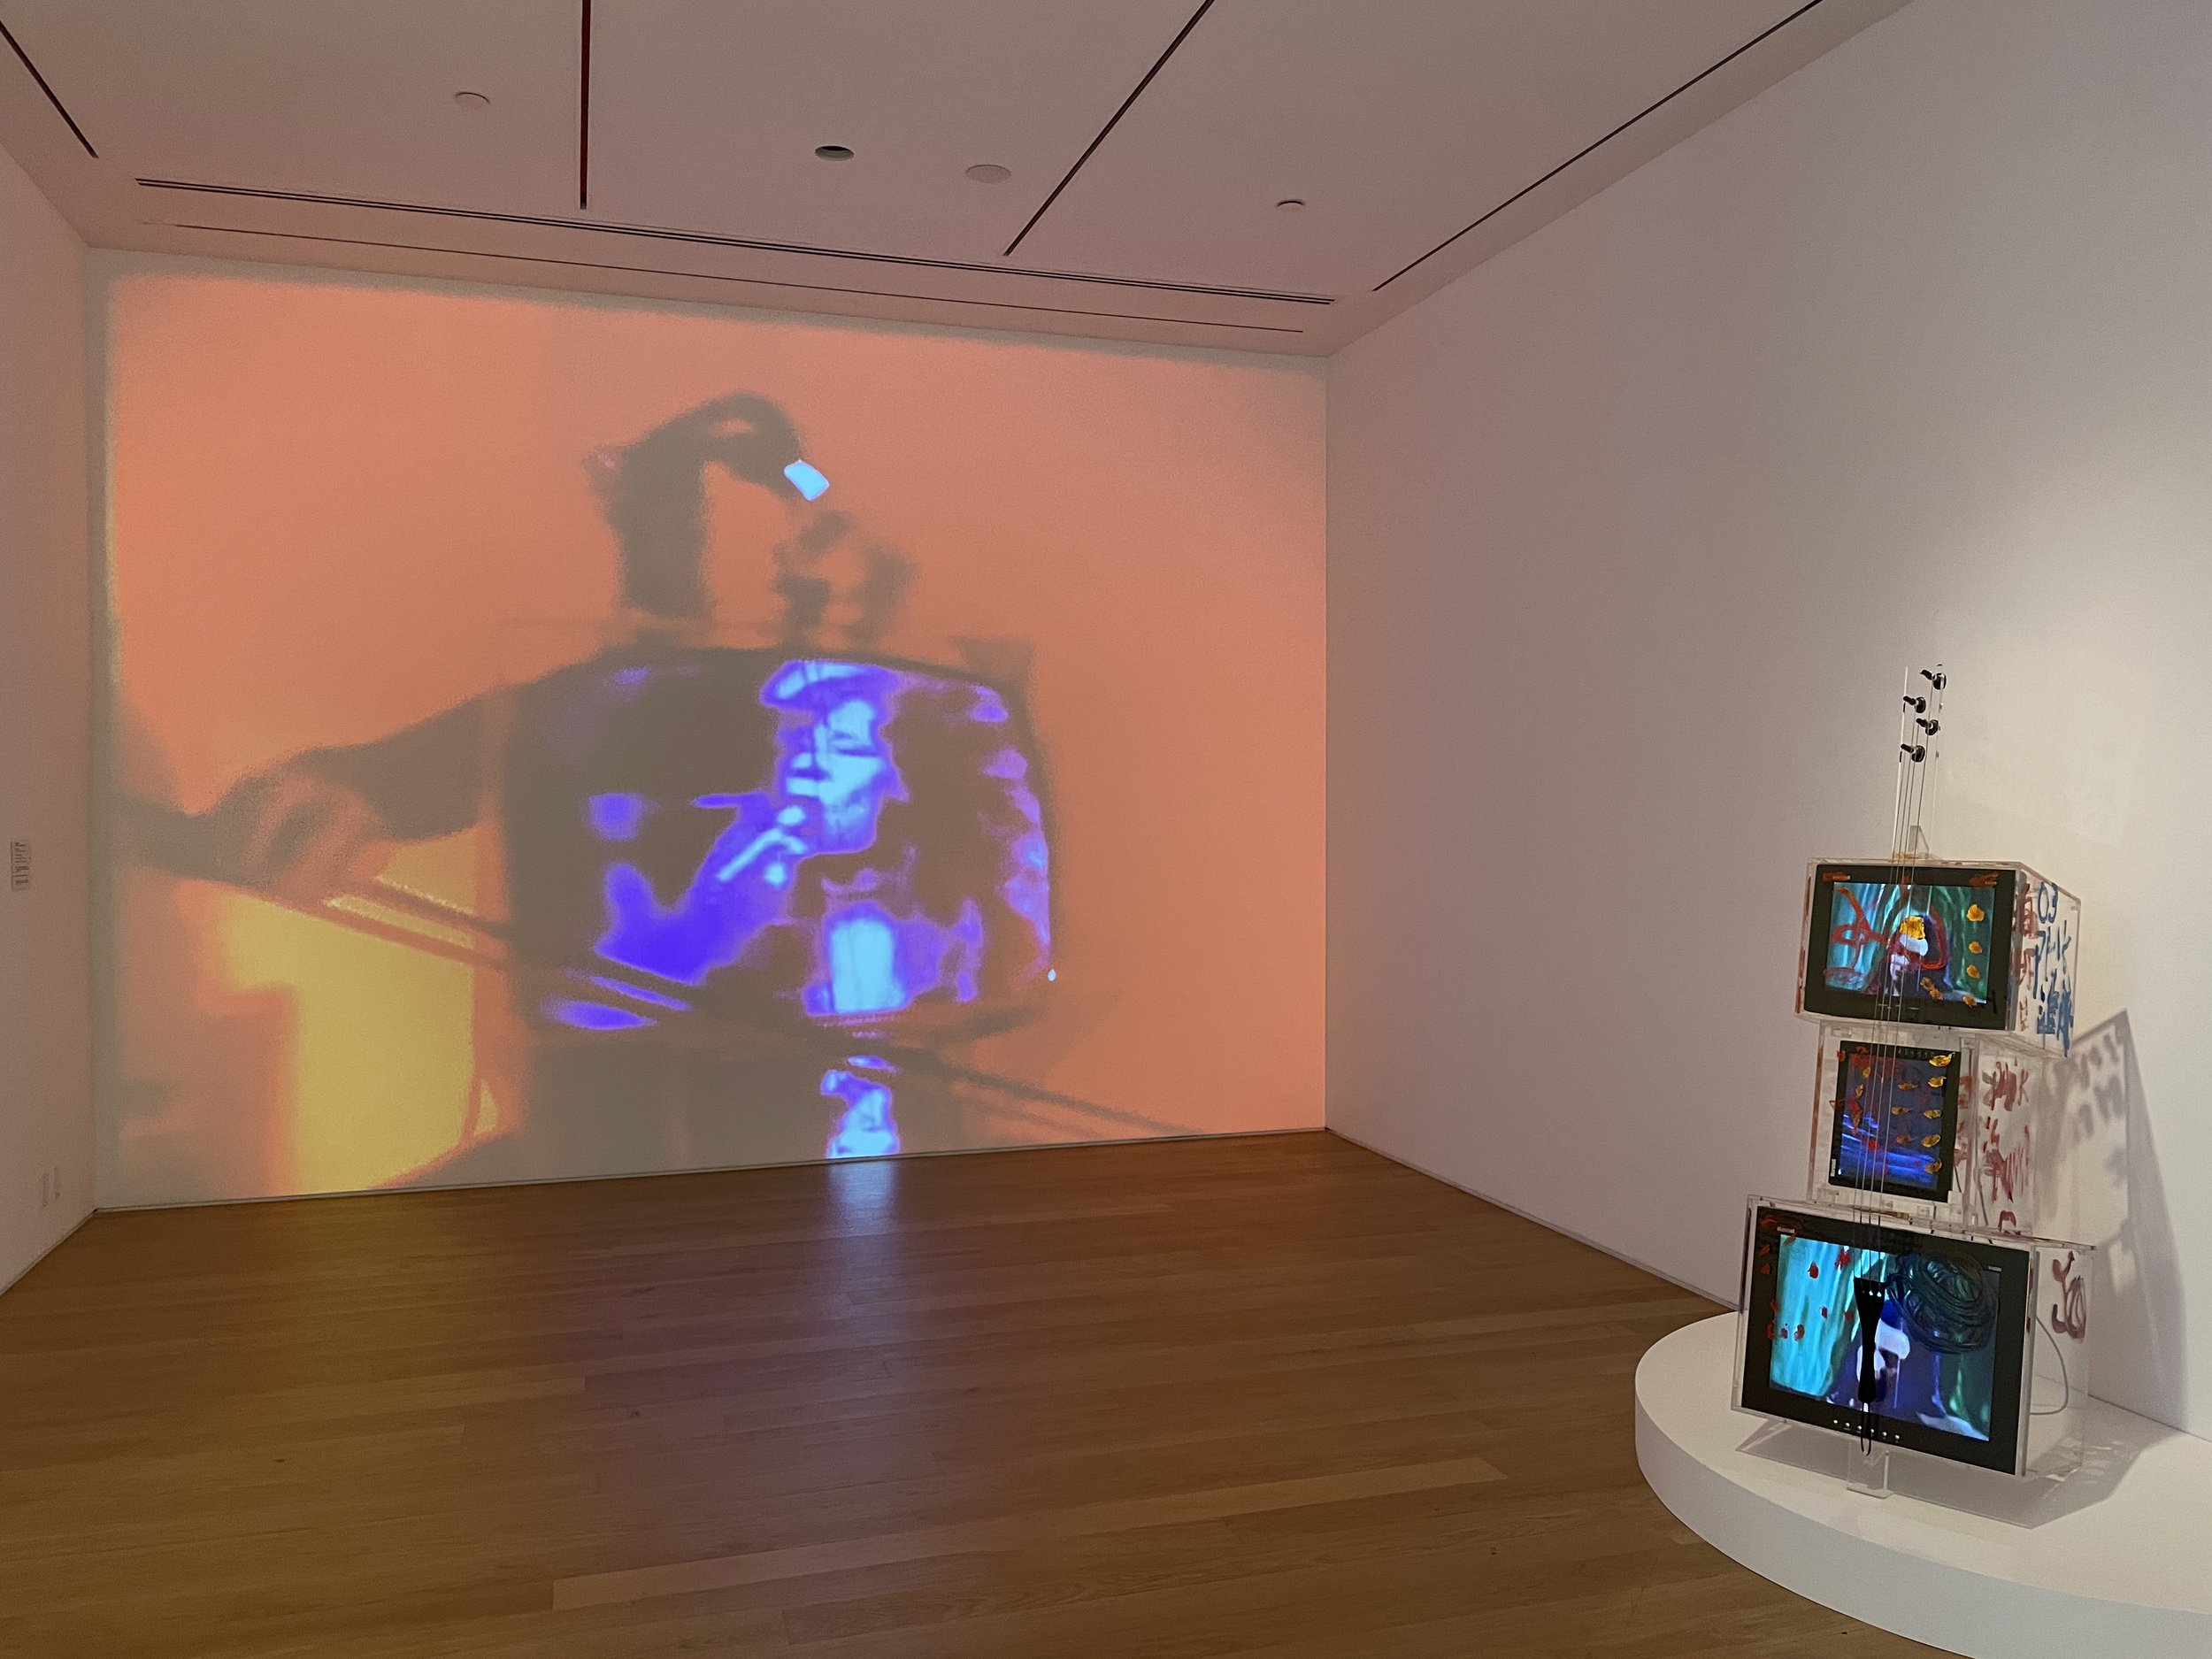  Installation view, Nam June Paik and Jud Yalkut,  TV Cello Premiere , 1971, 16 mm film (on video), color, silent, 7:25 min. Courtesy of Electronic Arts Intermix (EAI), New York; Nam June Paik,  TV Cello , 2003, single-channel video (color, sound), L